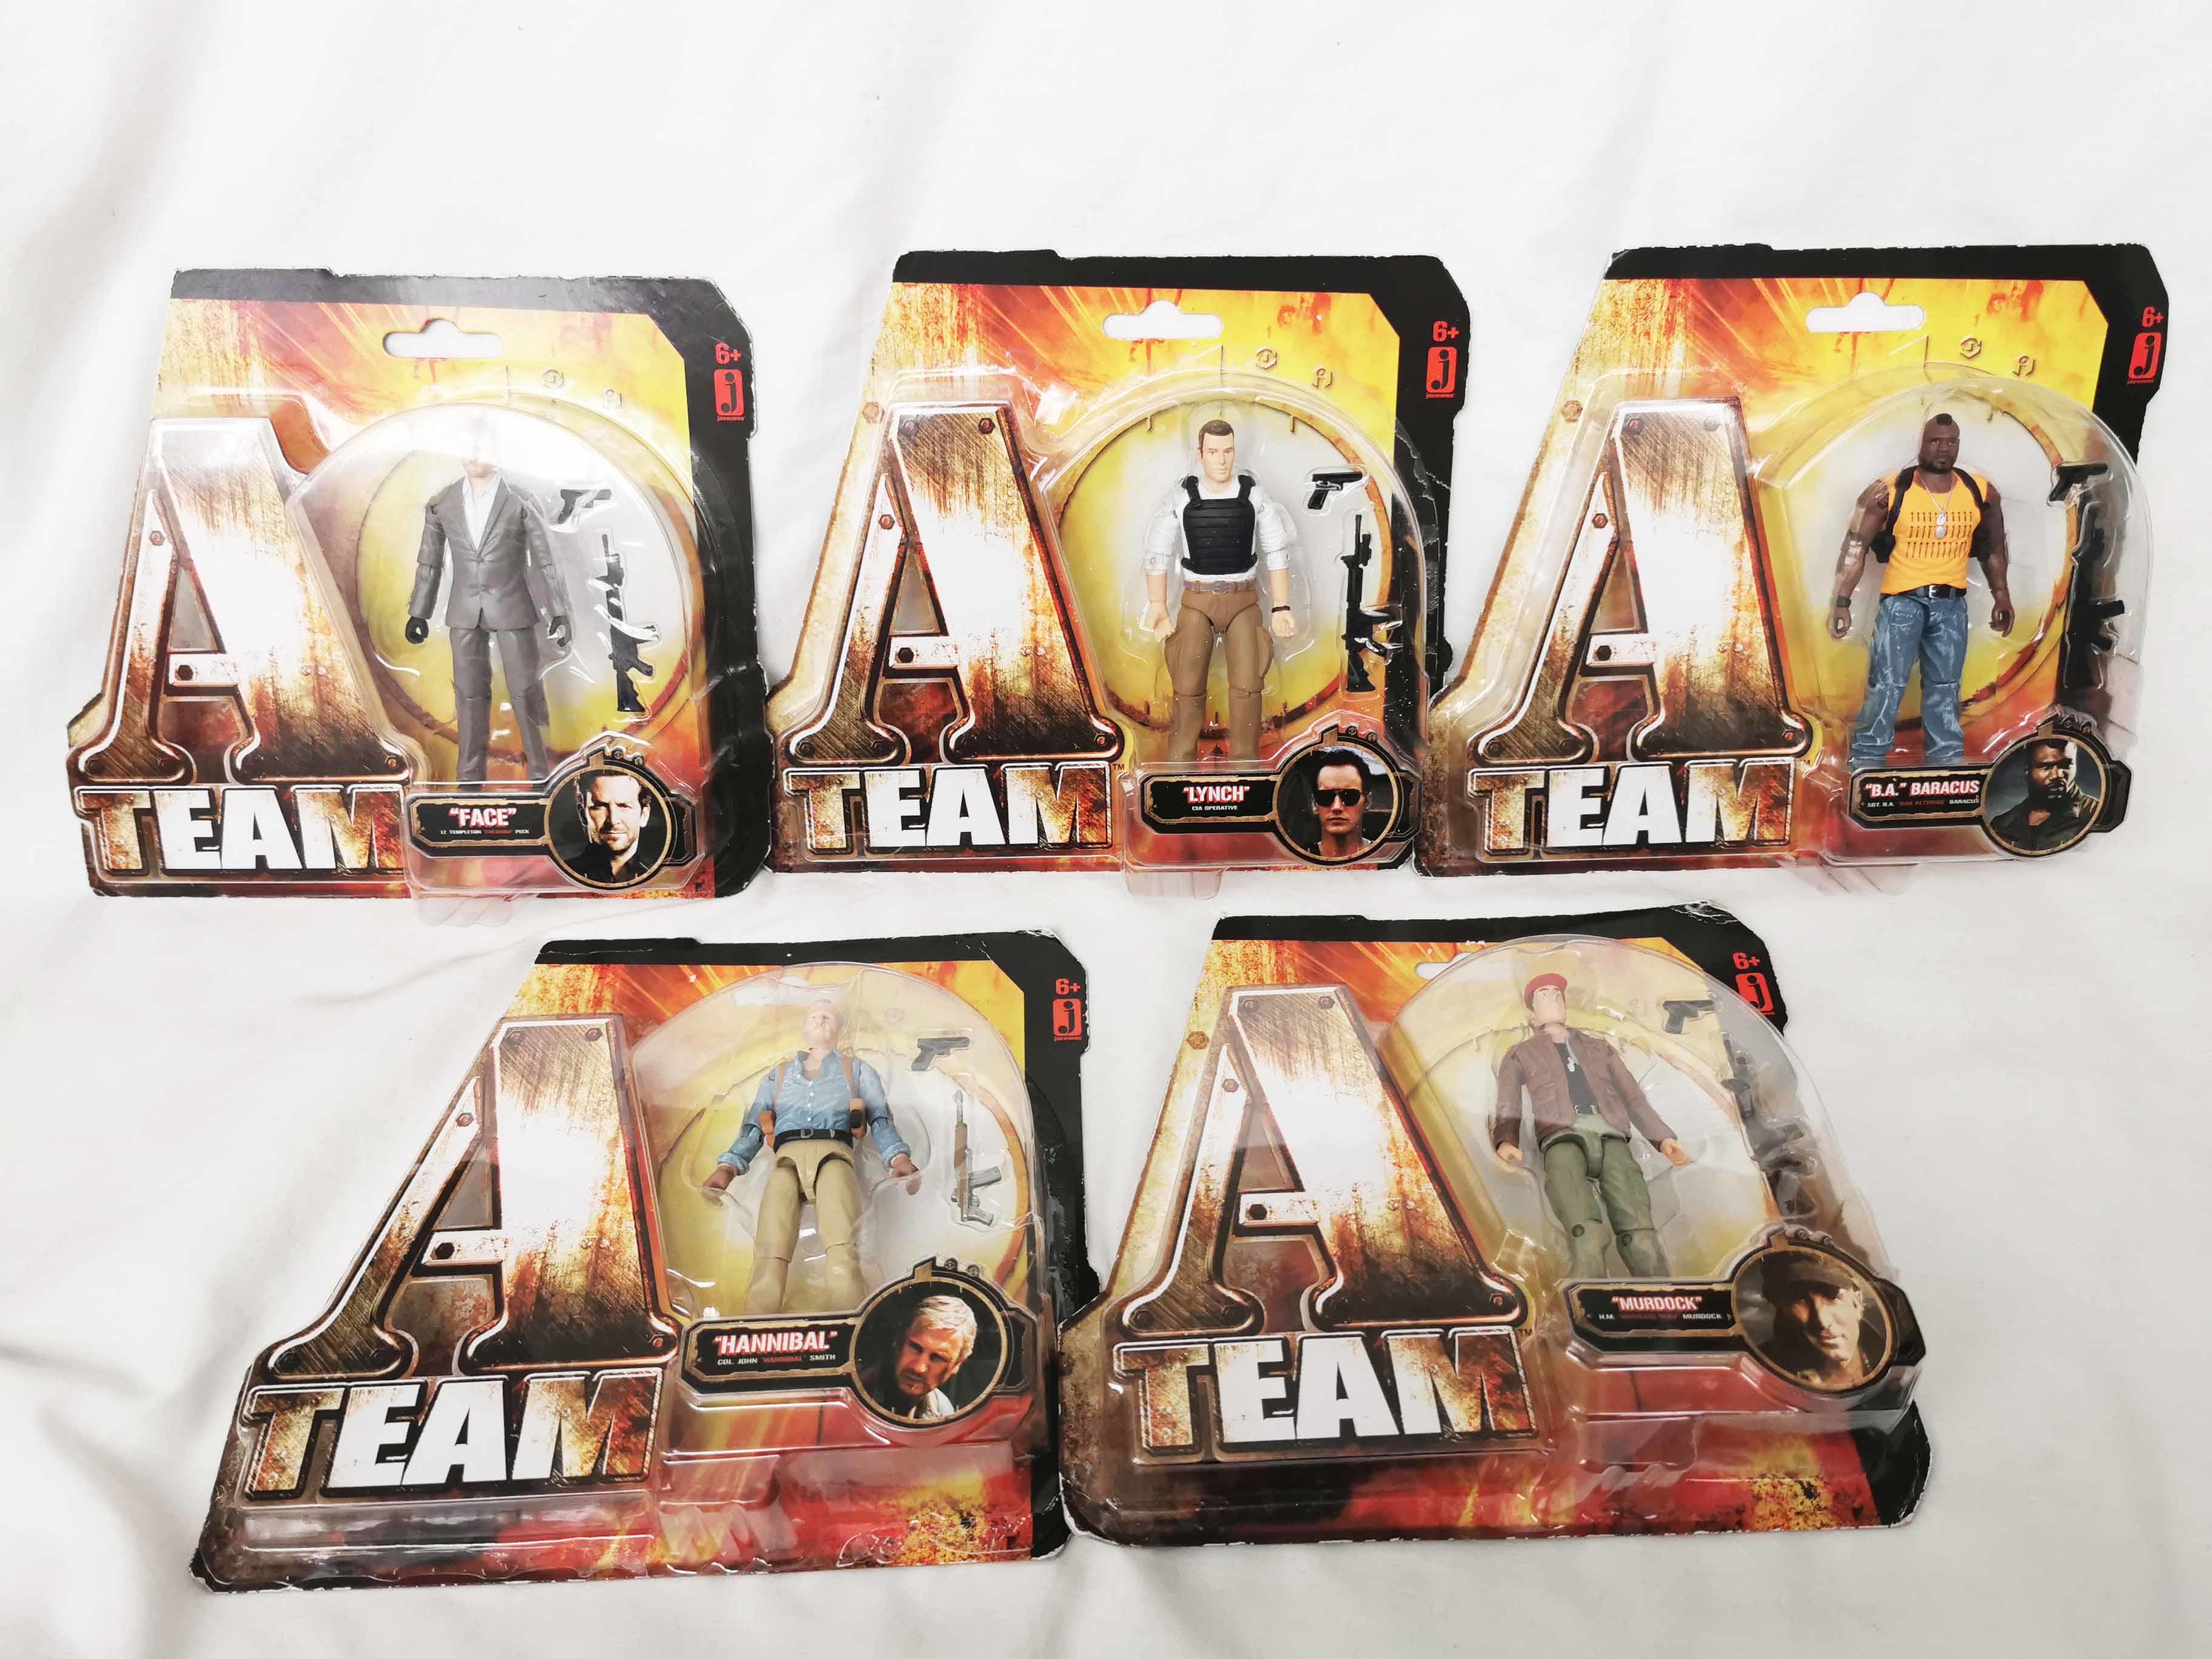 A-Team movie Action figures set  3.75 Action Figures Jazzwares includes Face, Hannibal, Murdoch, BA and Lynch